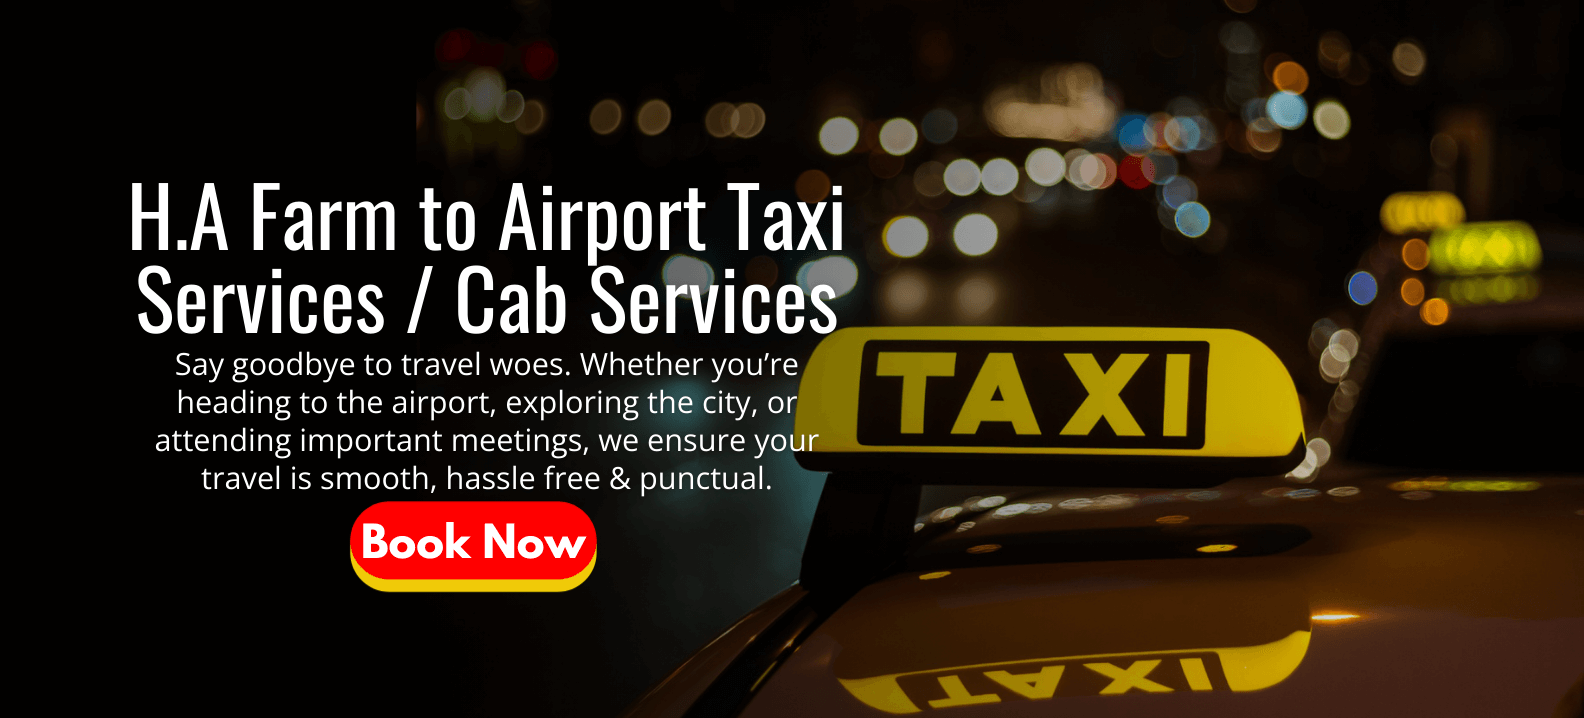 H.A Farm to Airport Taxi Services _ Cab Services